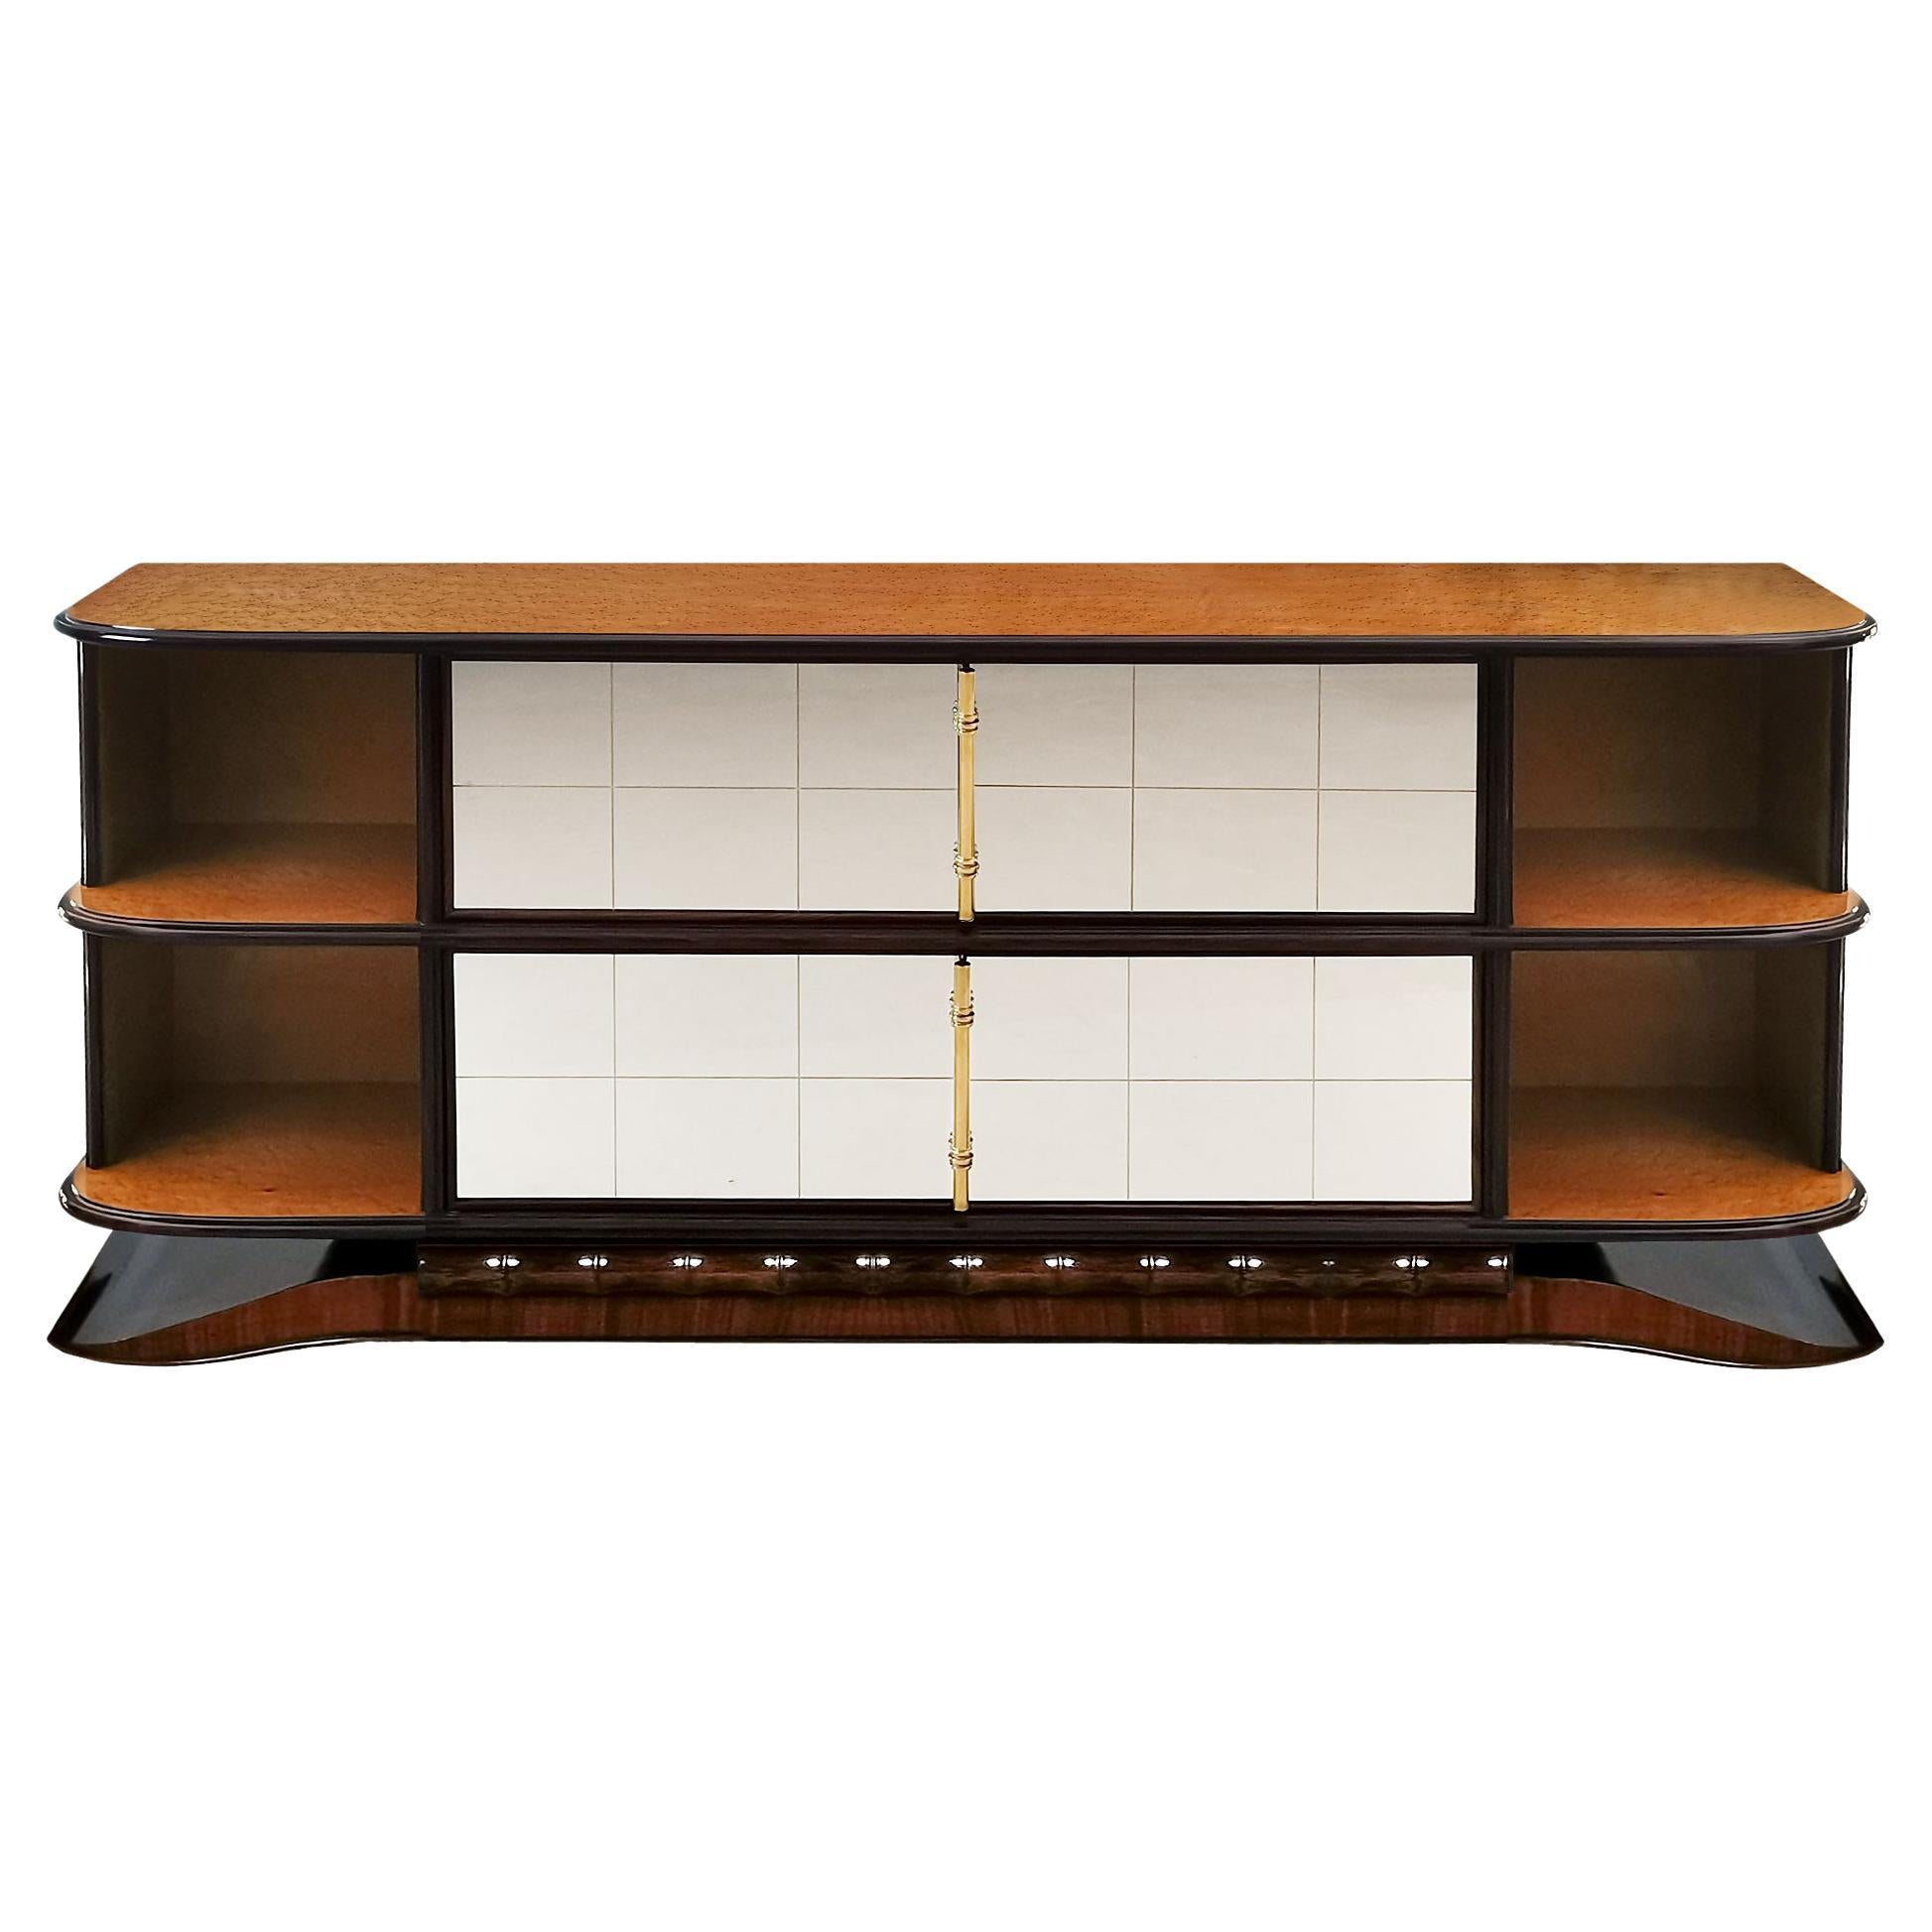 1930's Art Deco Sideboard, Birdseye Maple, Mahogany, Mirrors and Brass - Italy For Sale